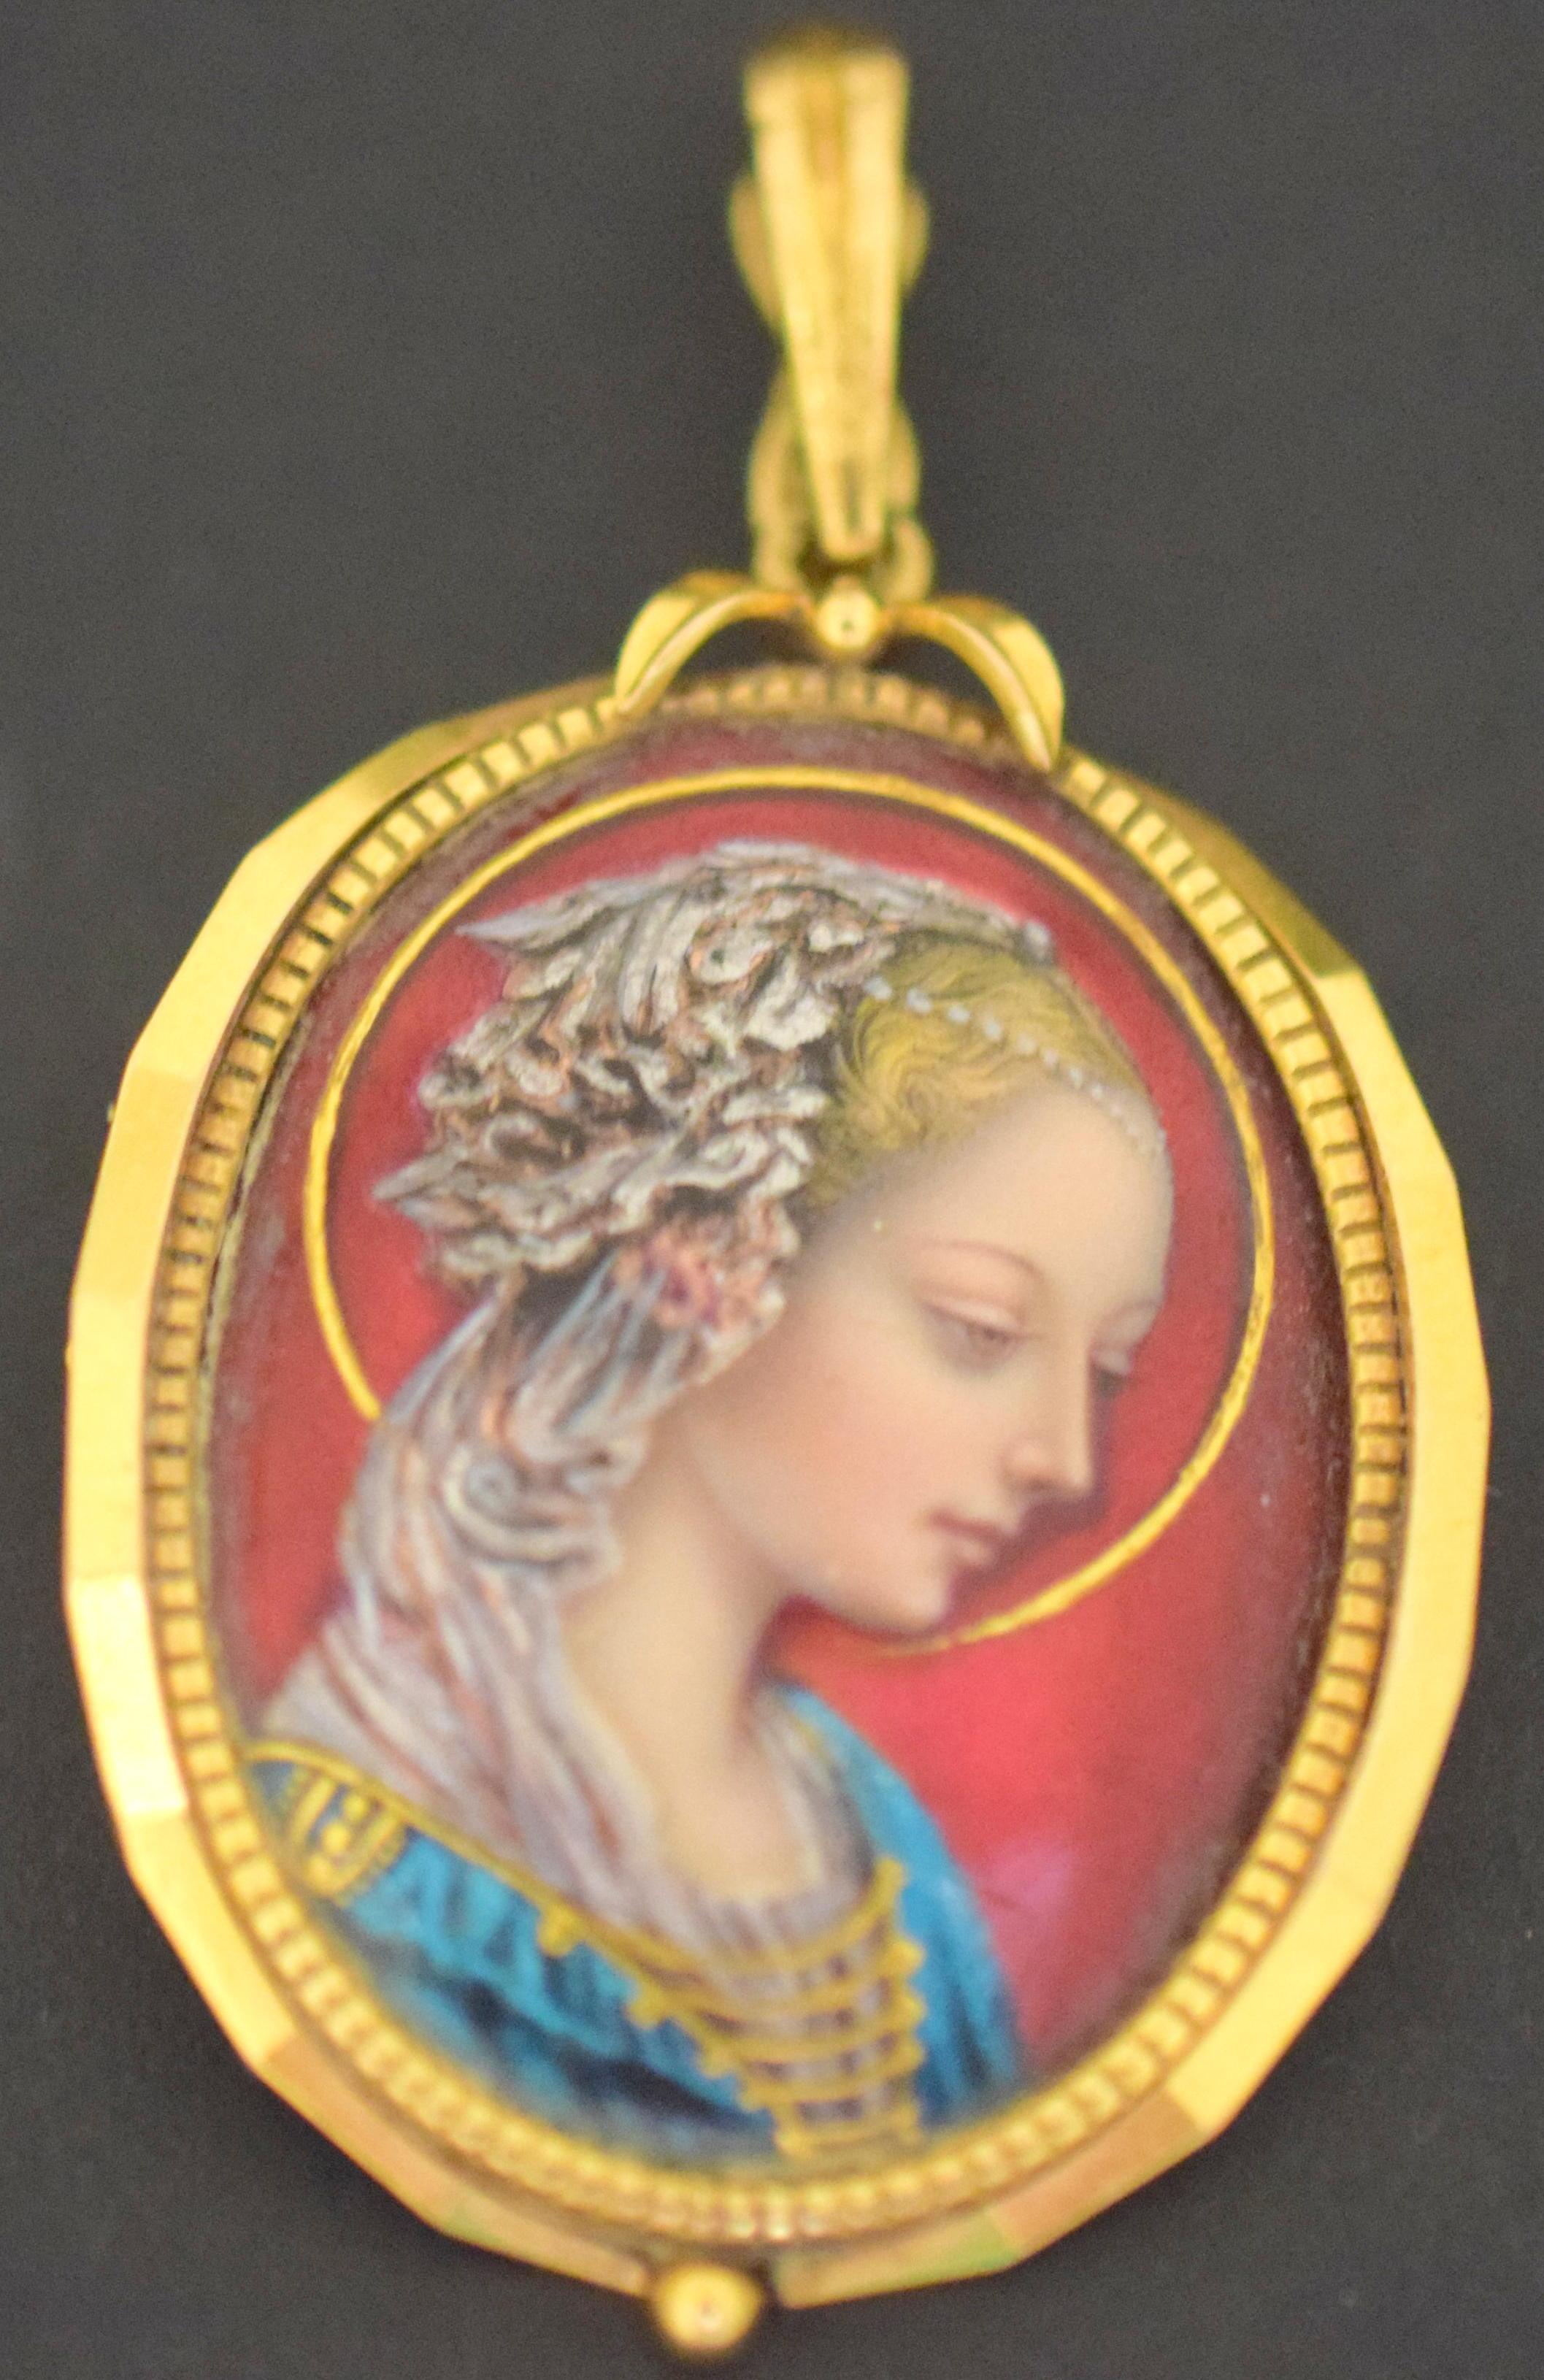 Amazing quality on this annunciation virgin enamel portrait of a lady. This pendant is crafted in 18k yellow gold, with hot enamel used to create the portrait. Colors pop on this piece showing red, blue and silver. Exquisite details are shown on